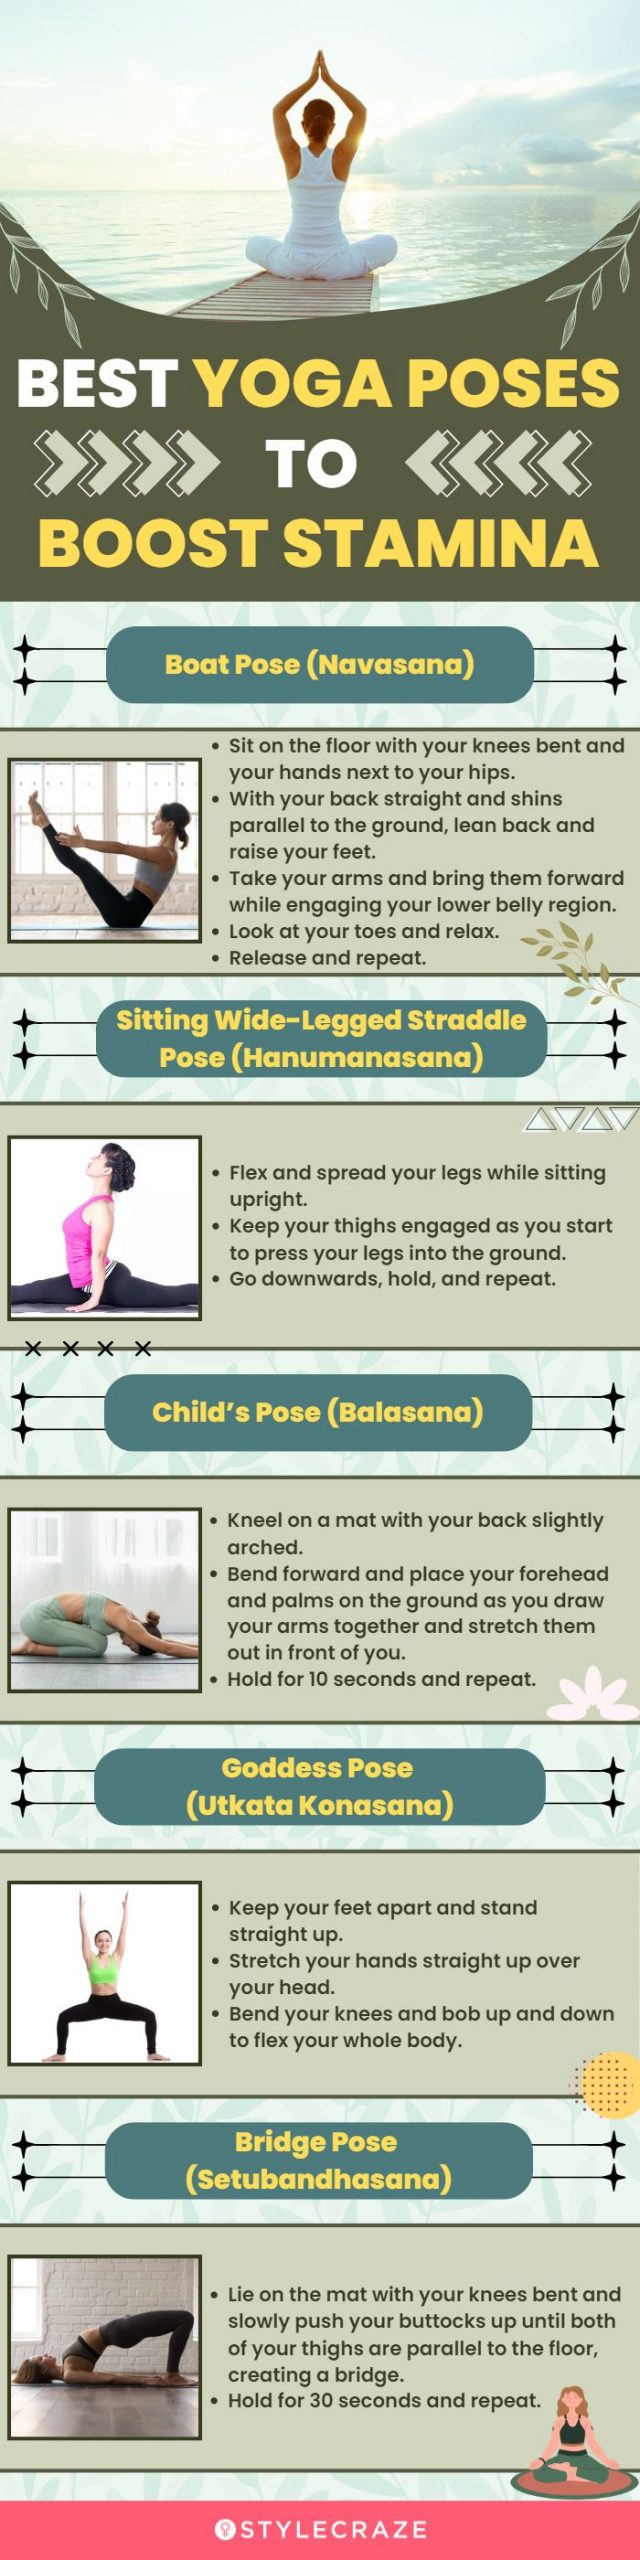 best yoga poses to boost stamina (infographic)